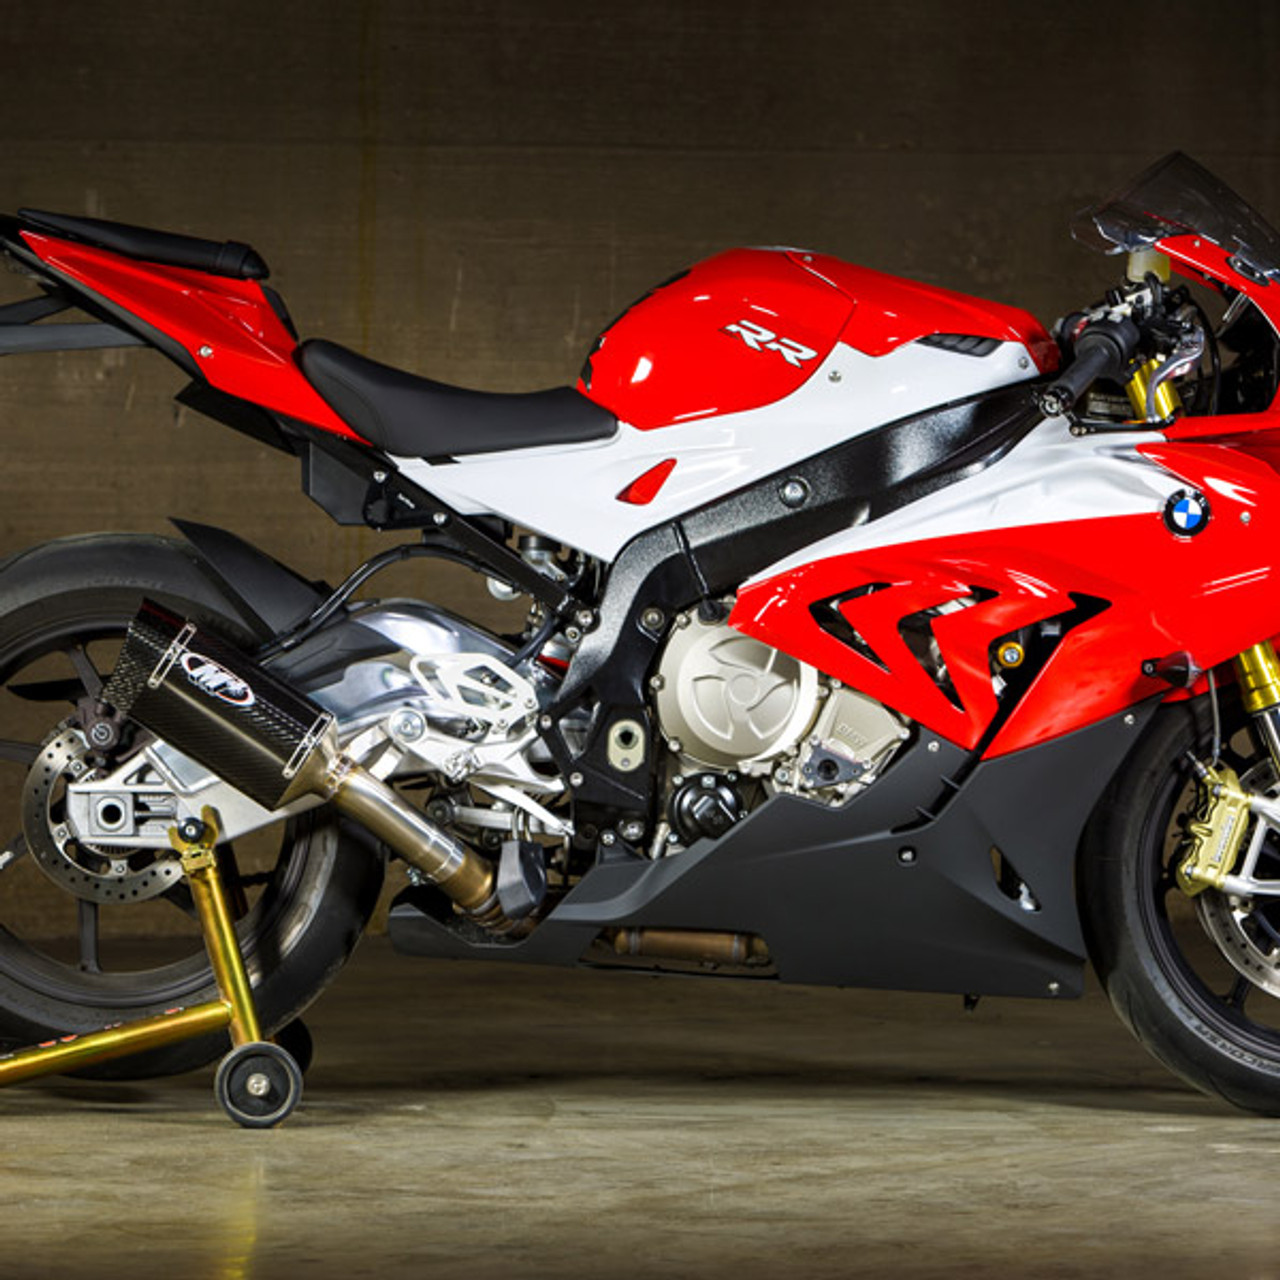 BMW S1000RR SPORT (2012-2014) Review, Specs & Prices